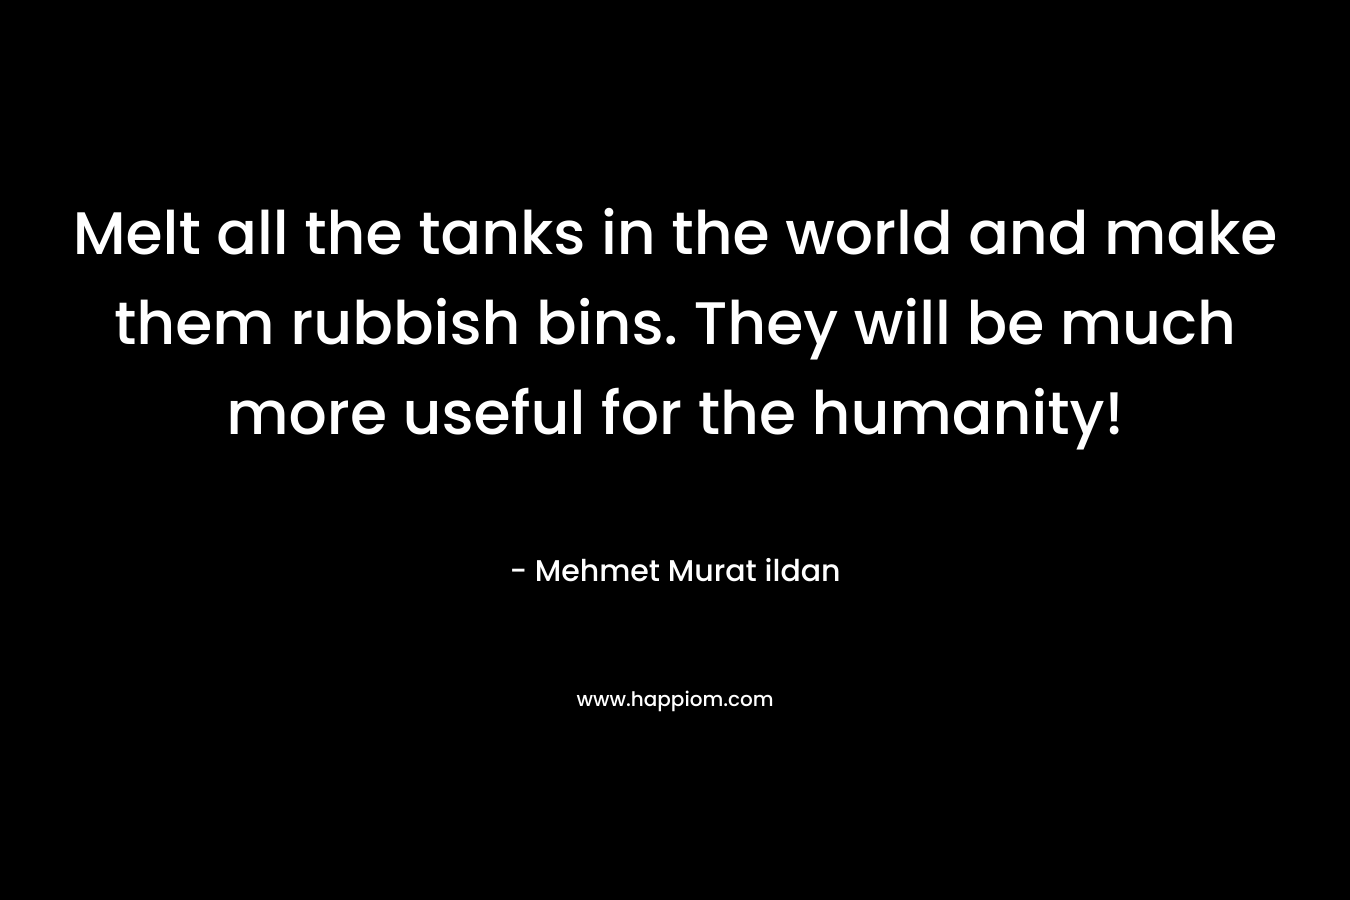 Melt all the tanks in the world and make them rubbish bins. They will be much more useful for the humanity!